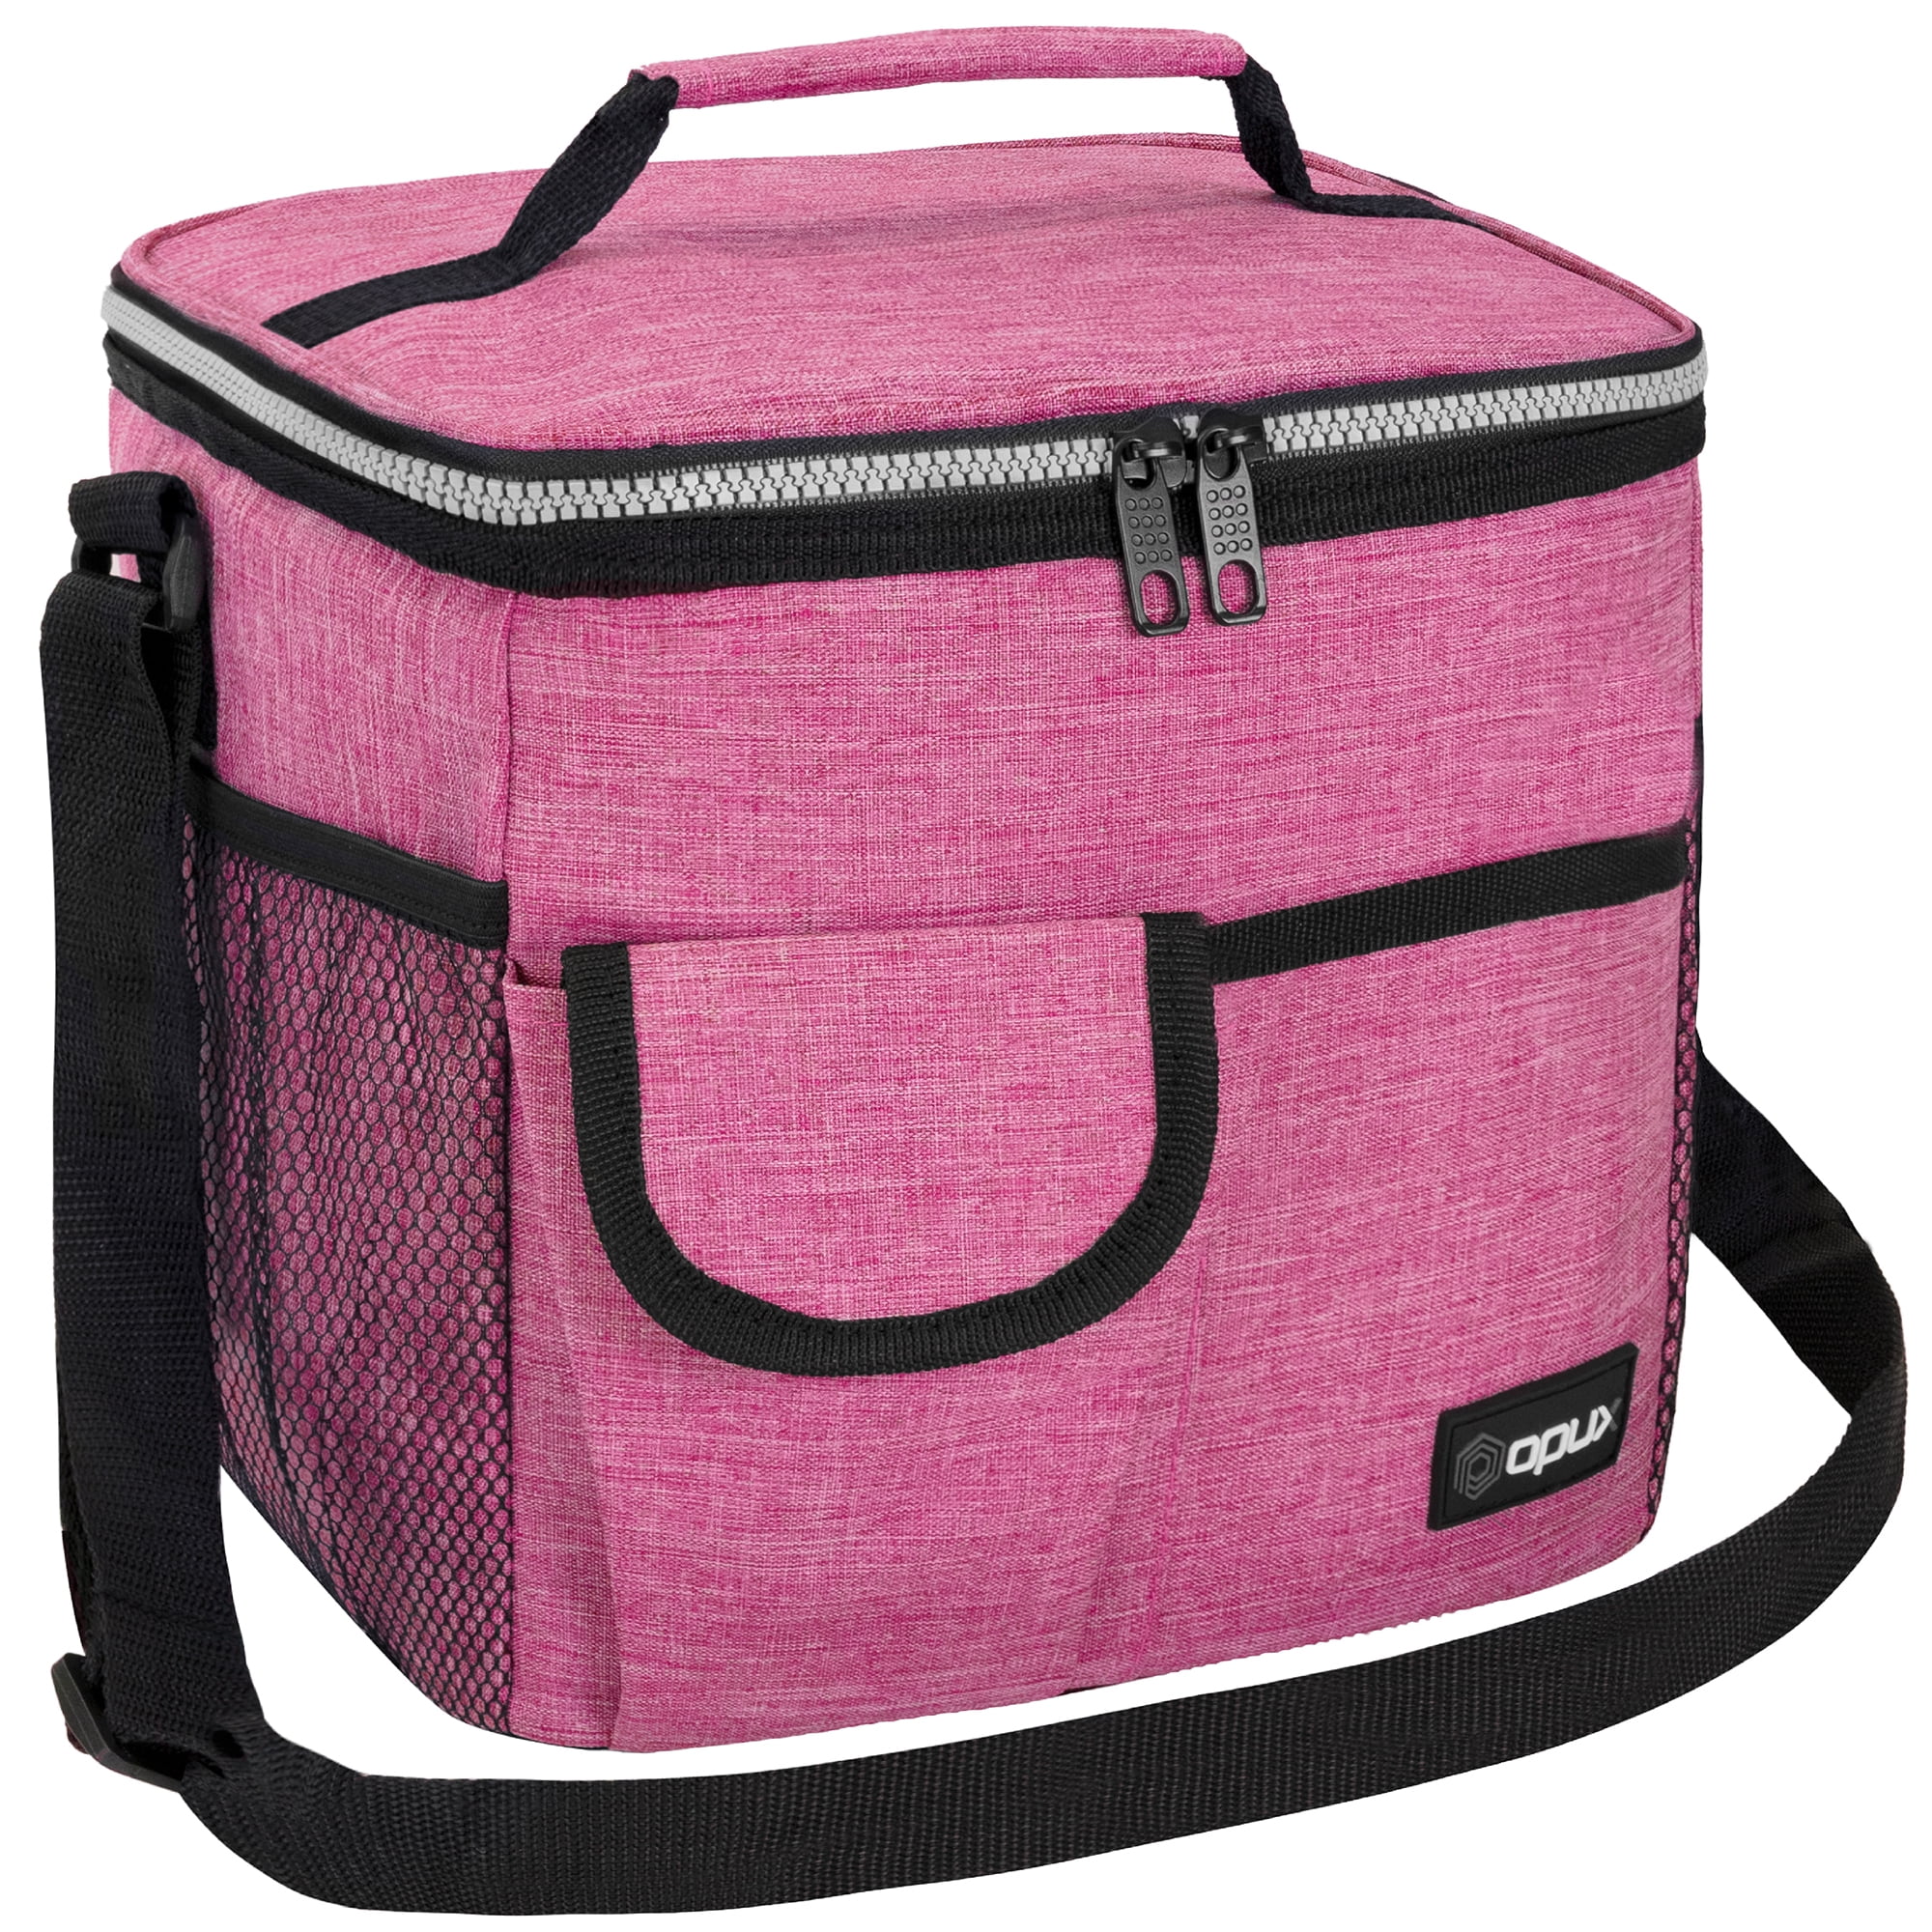 Lunch Box for Women, Insulated Lunch Bags for Women, Large